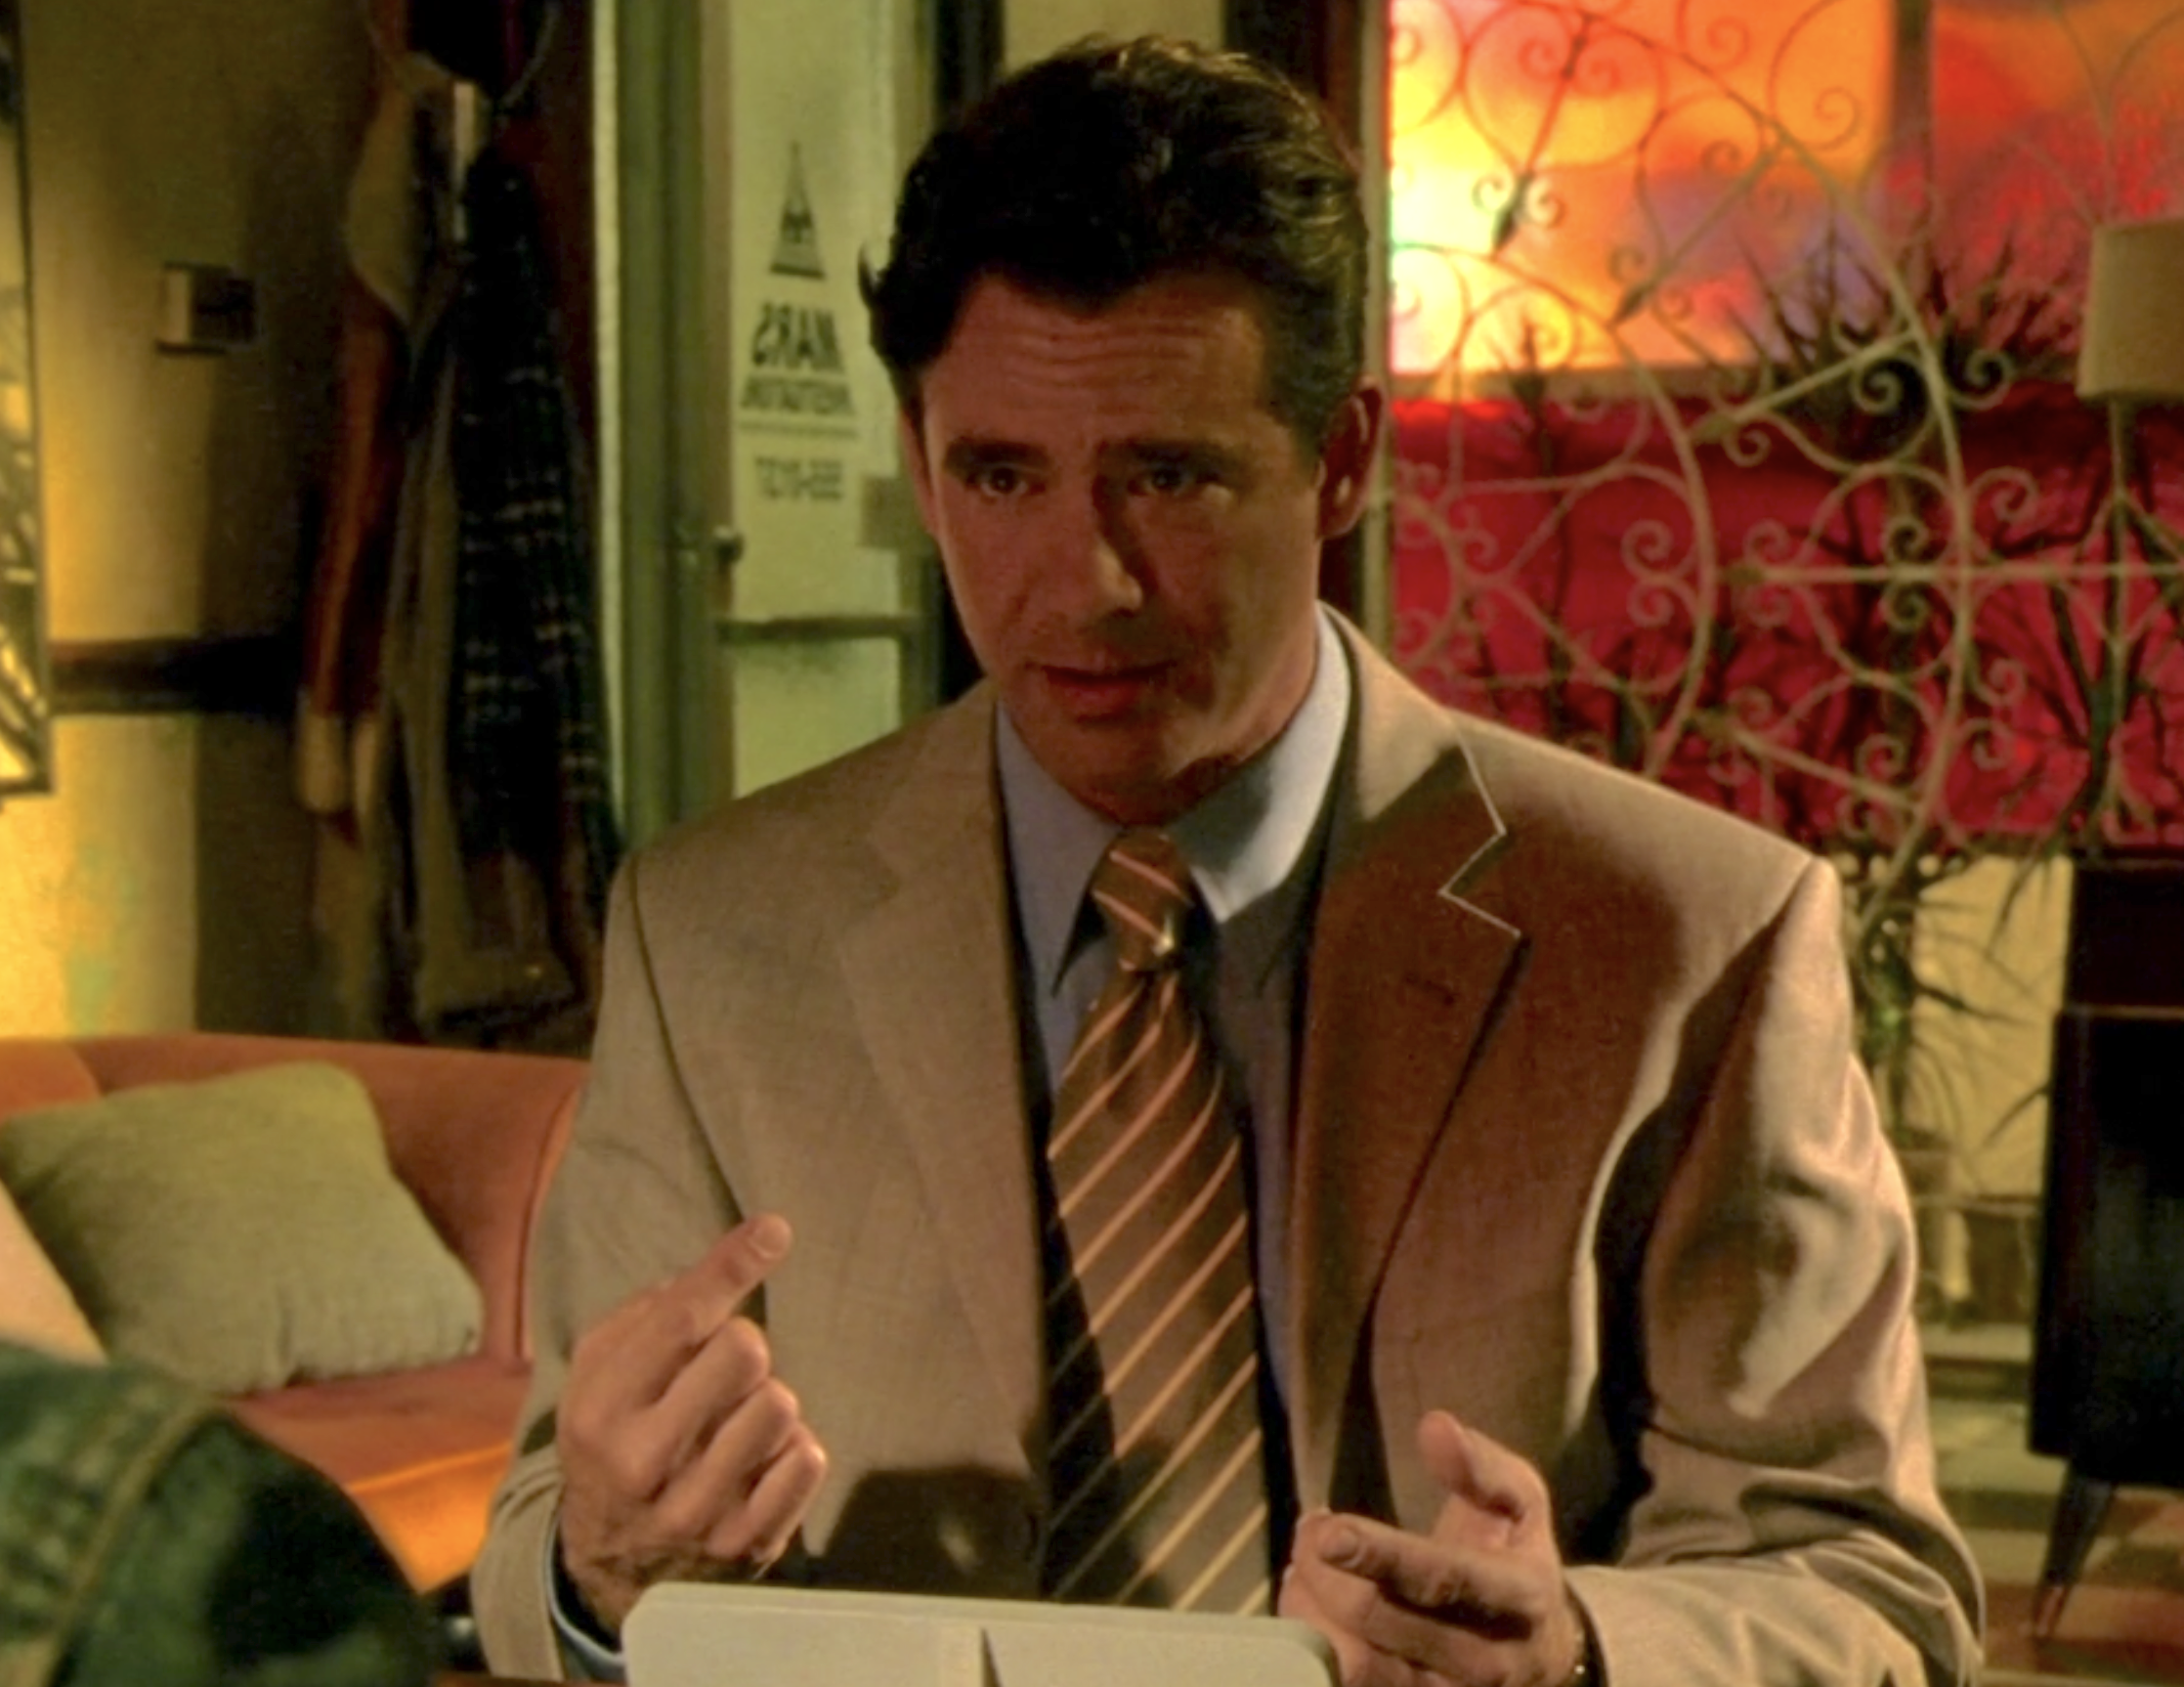 Screenshot from Veronica Mars S1E8. Cliff McCormack is sitting across from an offscreen Veronica in the waiting room of Mars Investigations. He's wearing a tan suit with a blue collared shirt and a tie with browna and white stripes. He is pointing to himself as he talks.